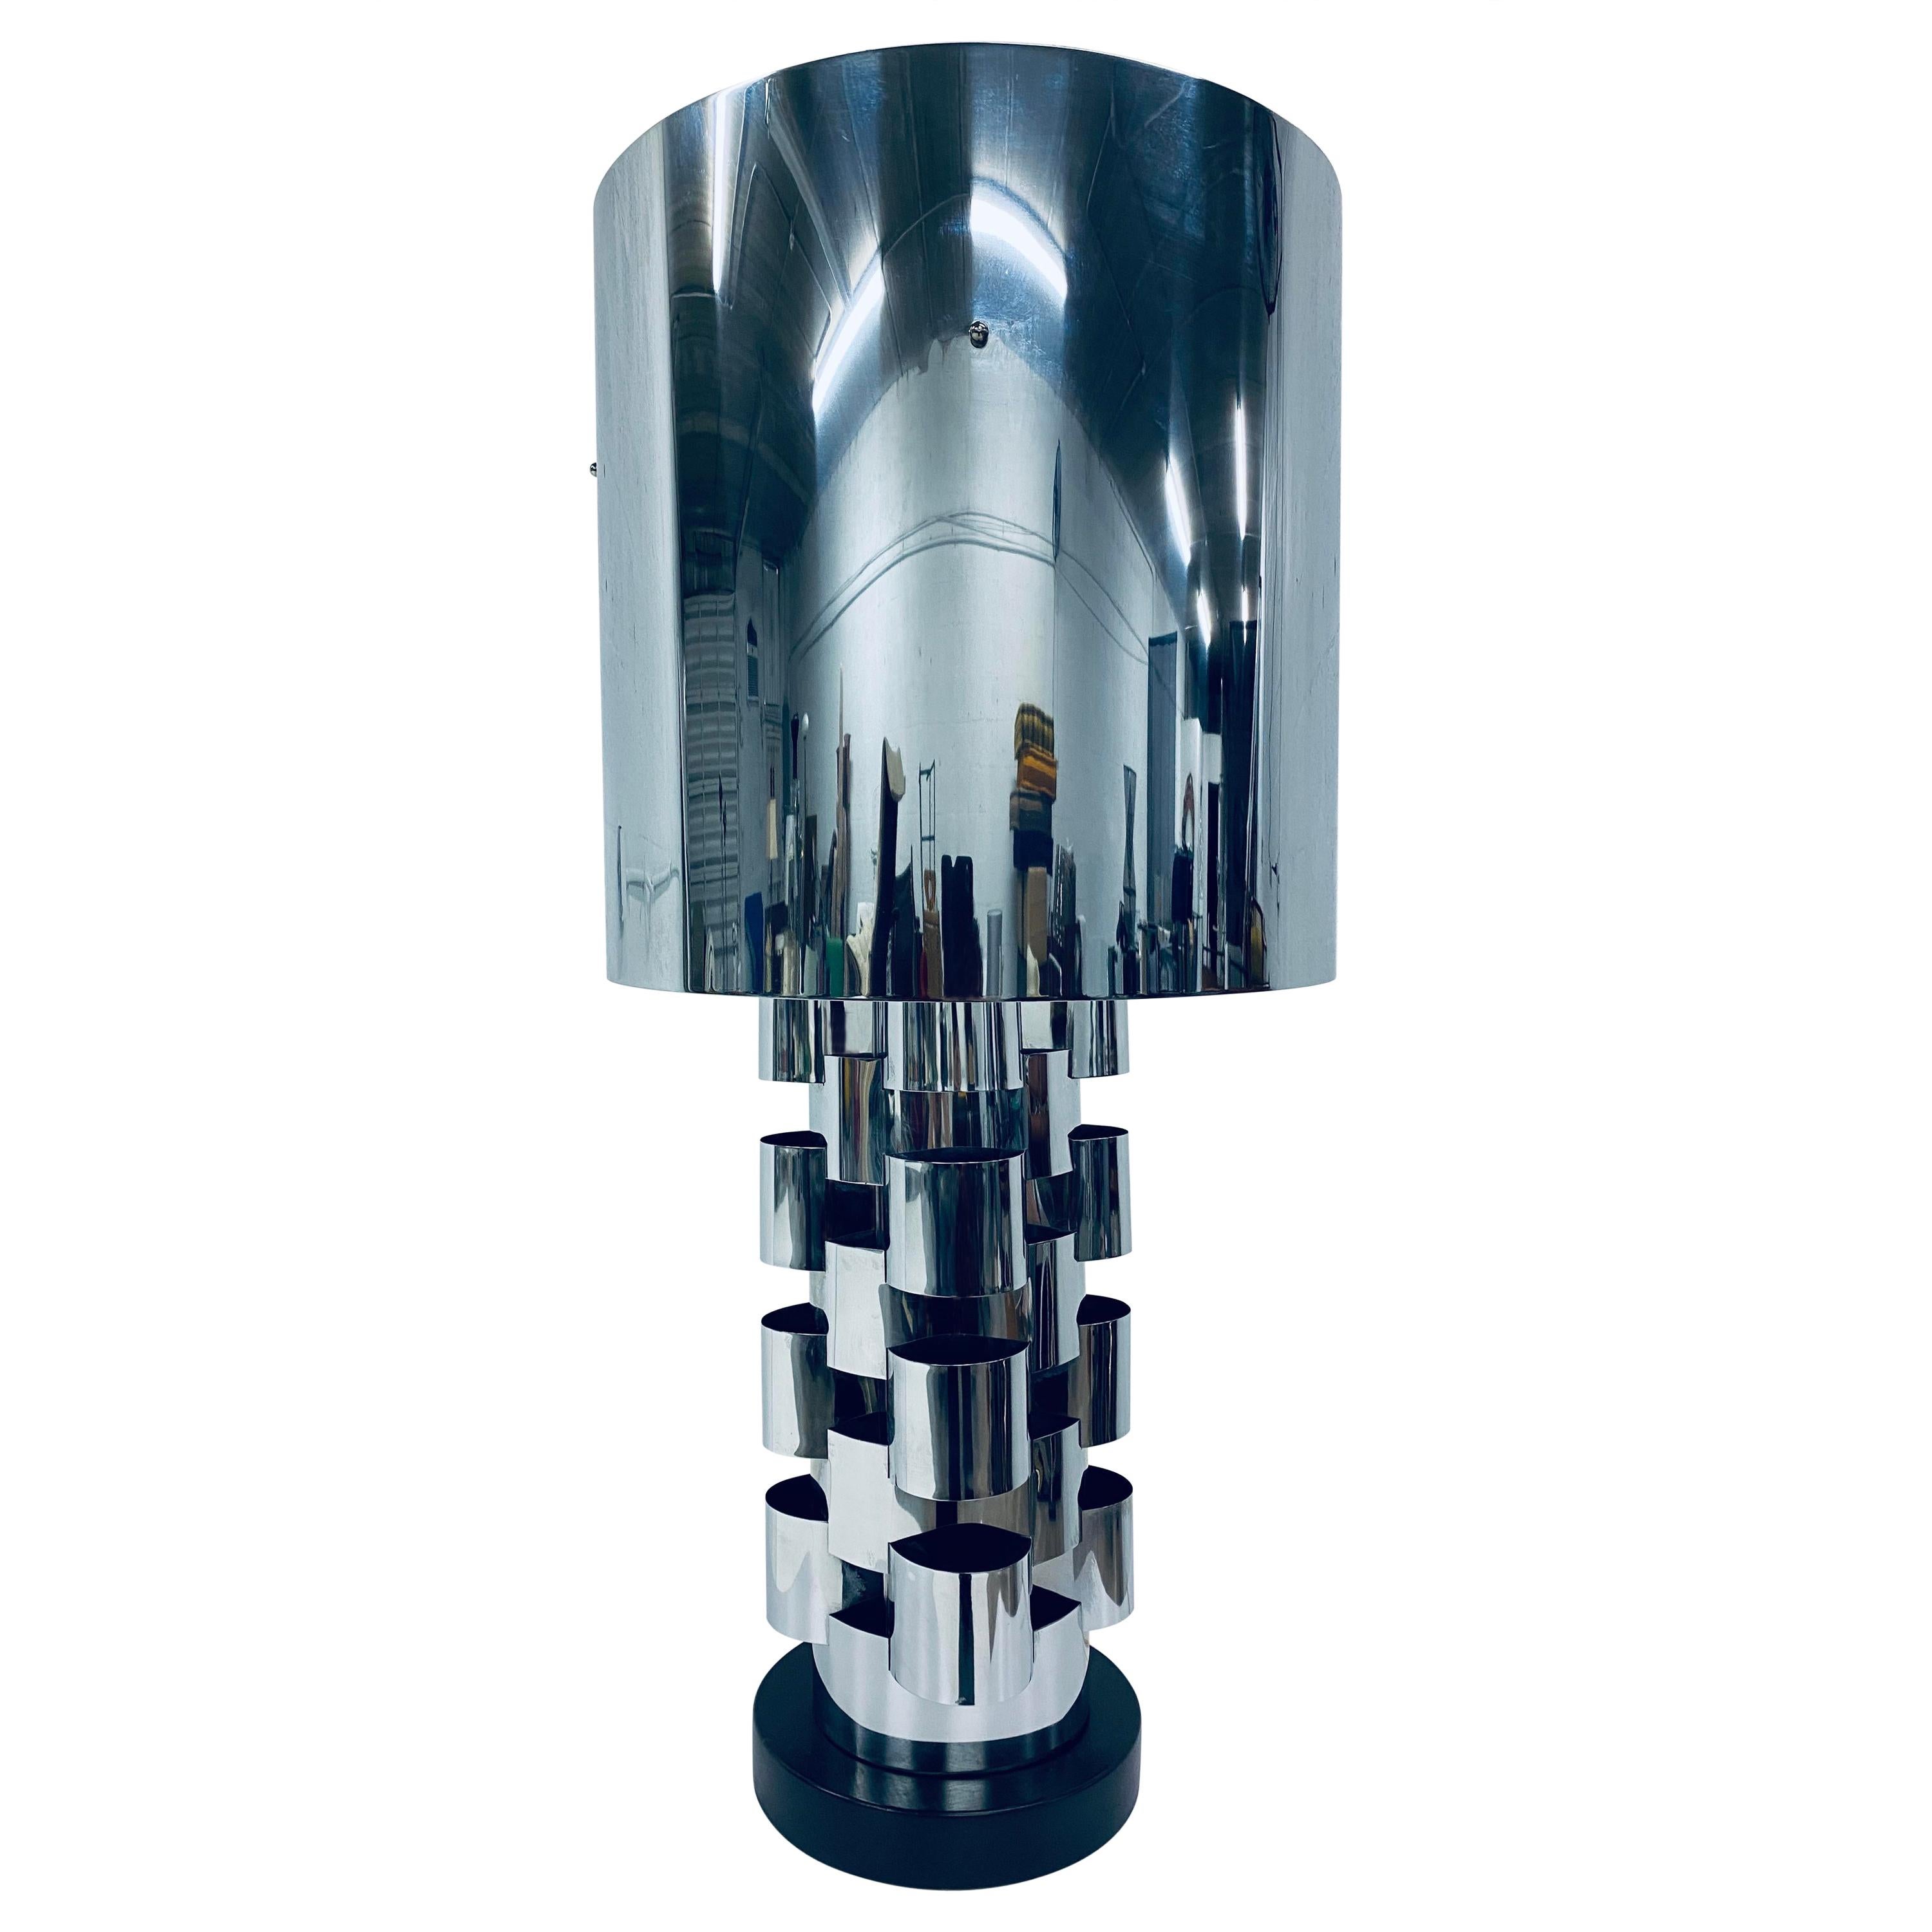 C. Jere Polished Chrome Table Lamp with Shade